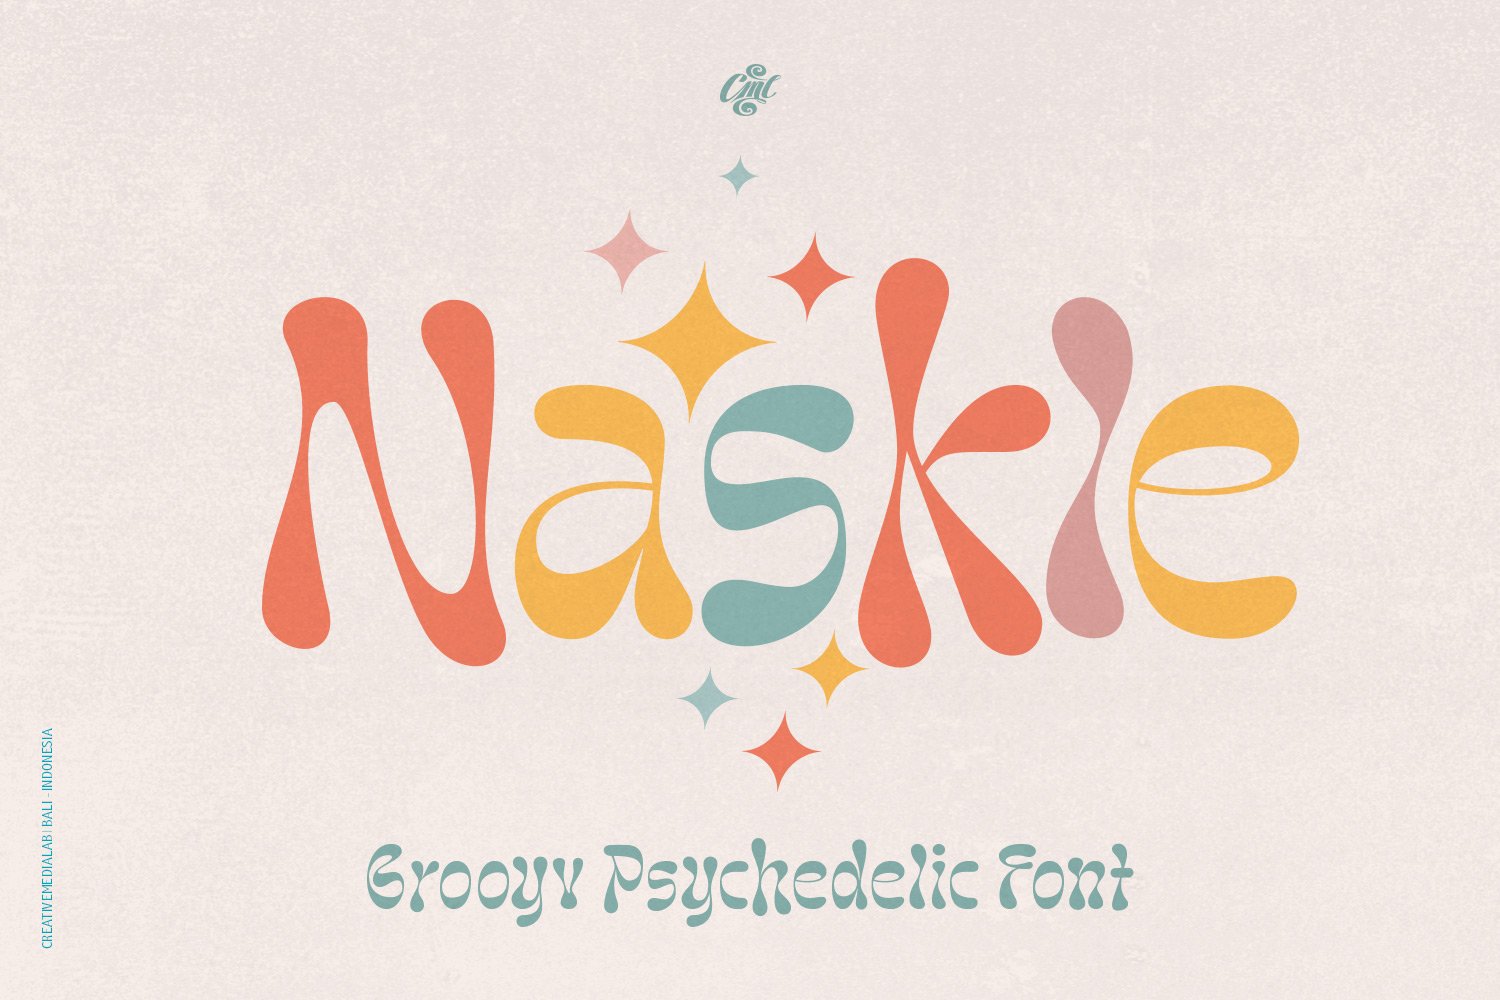 Naskle - Groovy Psychedelic Font cover image.